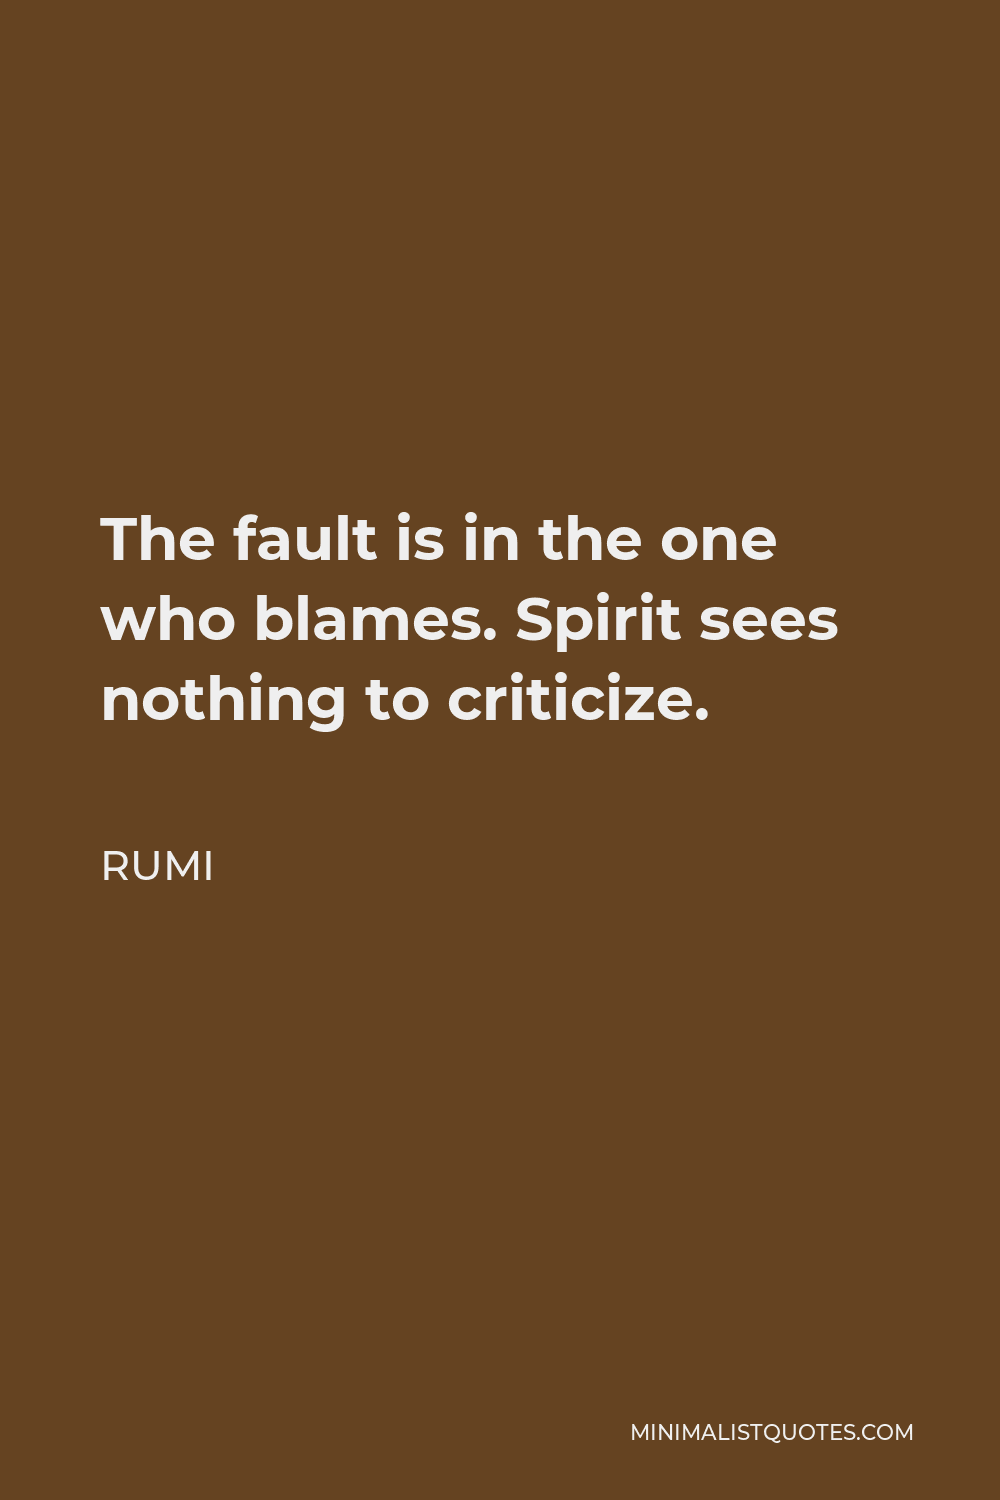 Rumi Quote - The fault is in the one who blames. Spirit sees nothing to criticize.